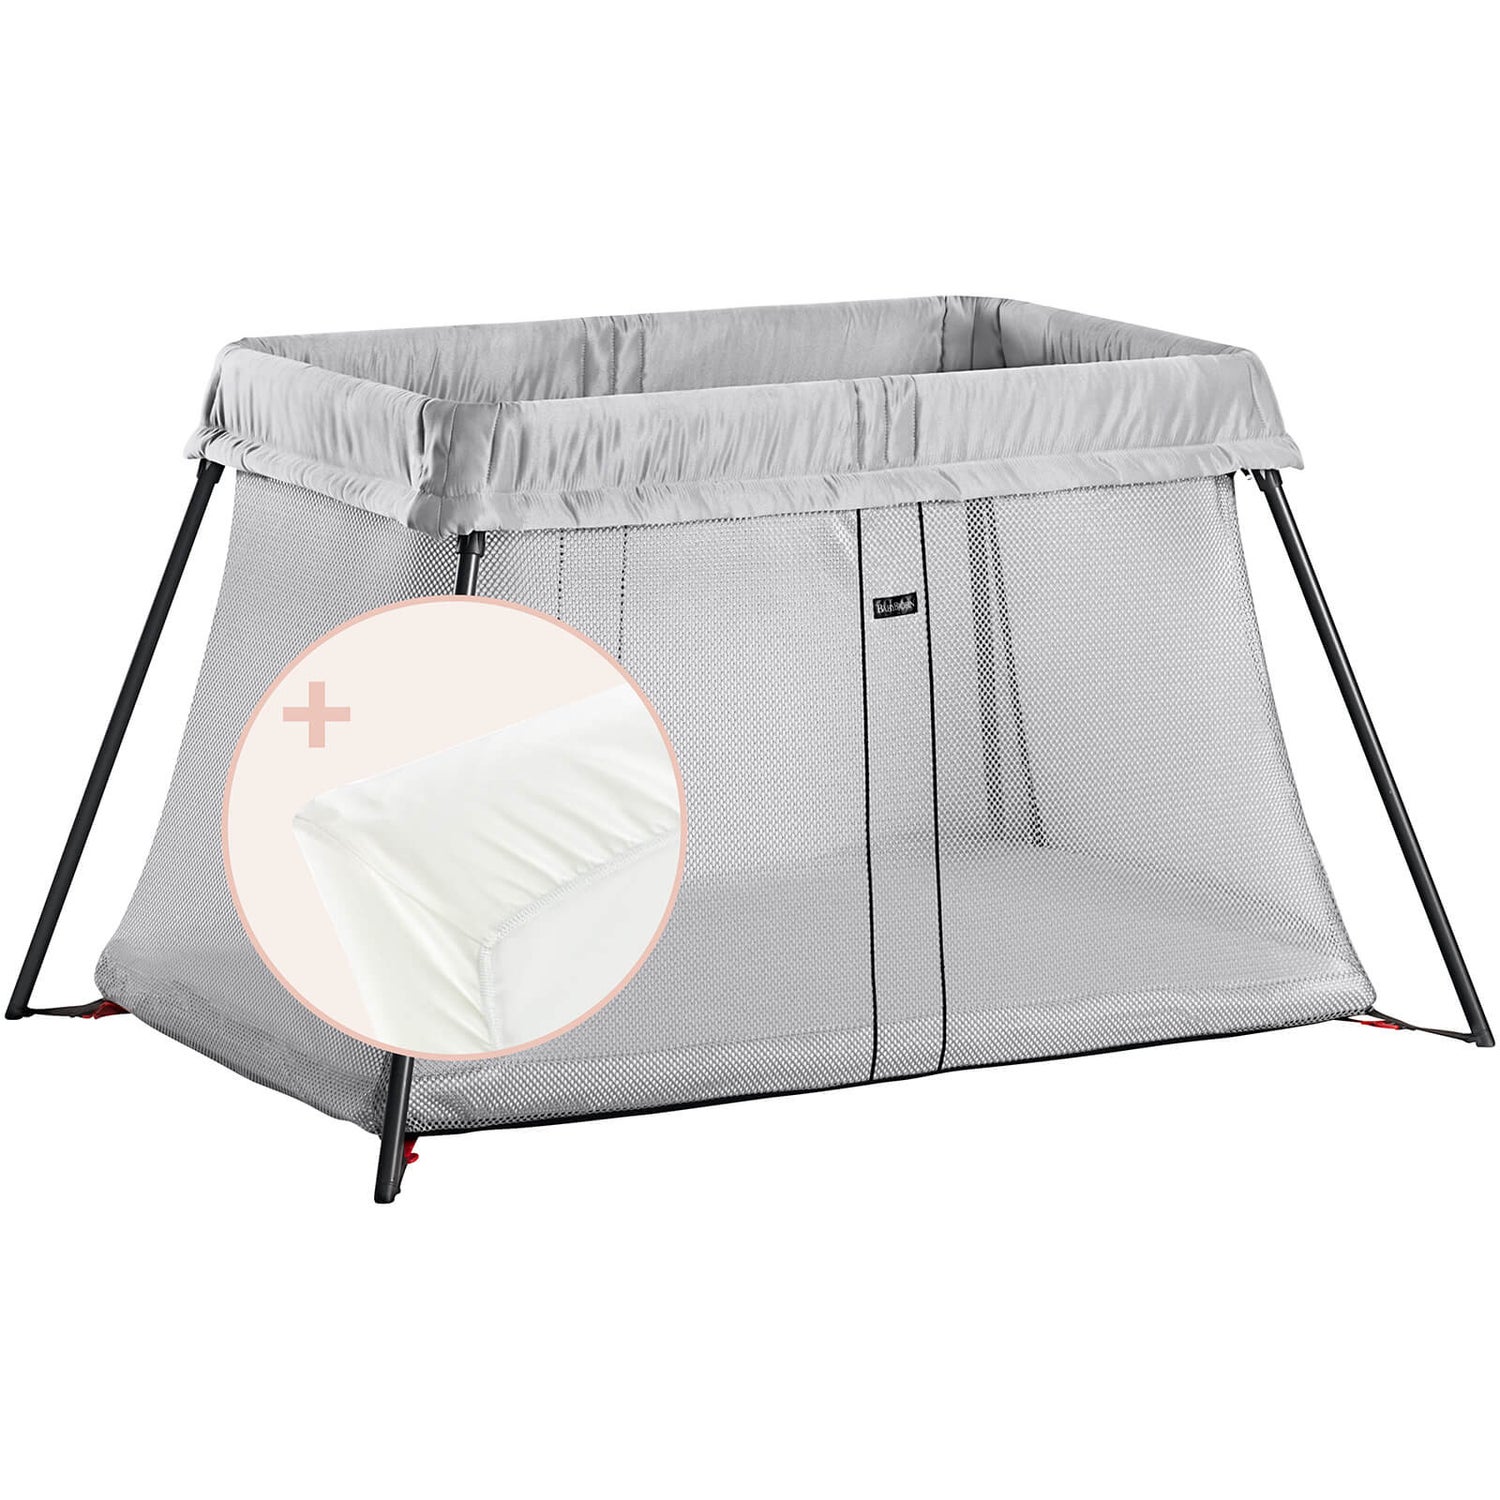 BABYBJÖRN Travel Cot and Fitted Sheet - Silver